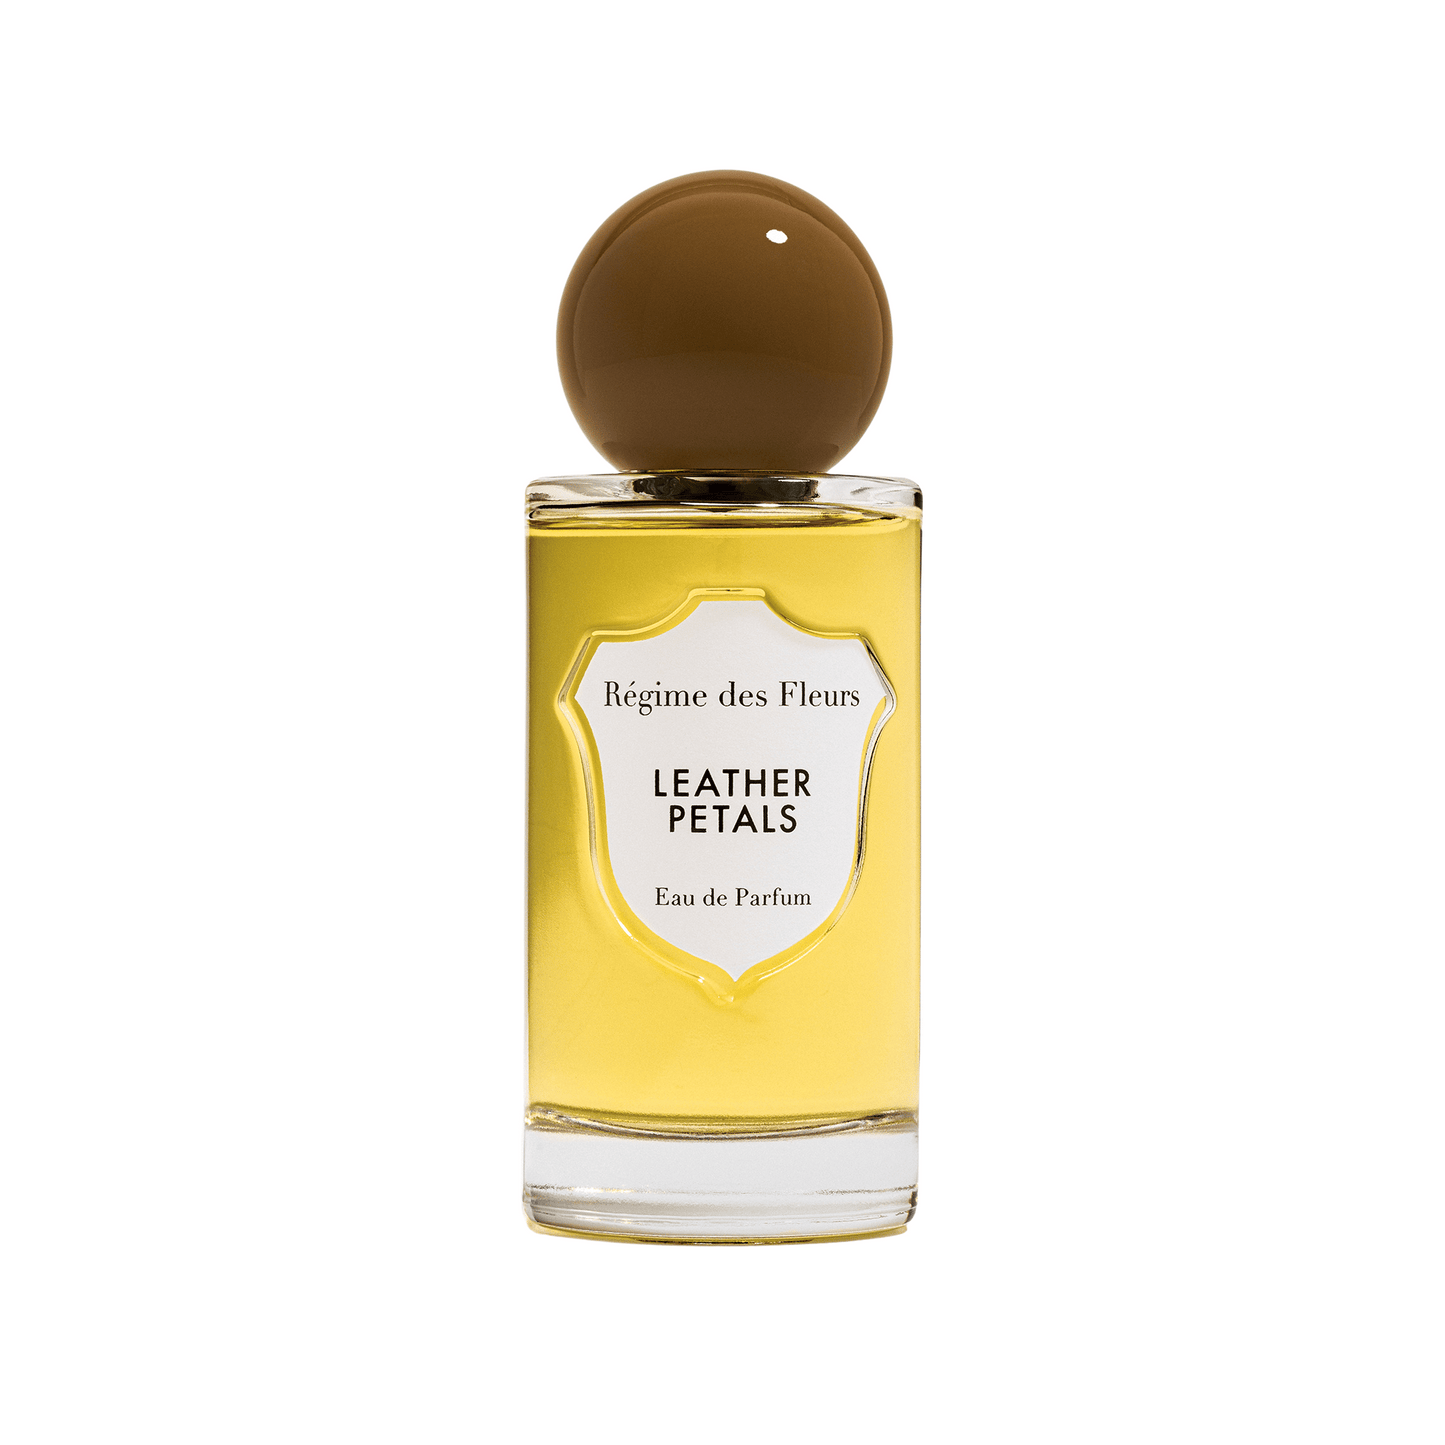 Primary Image of Leather Petals EDP